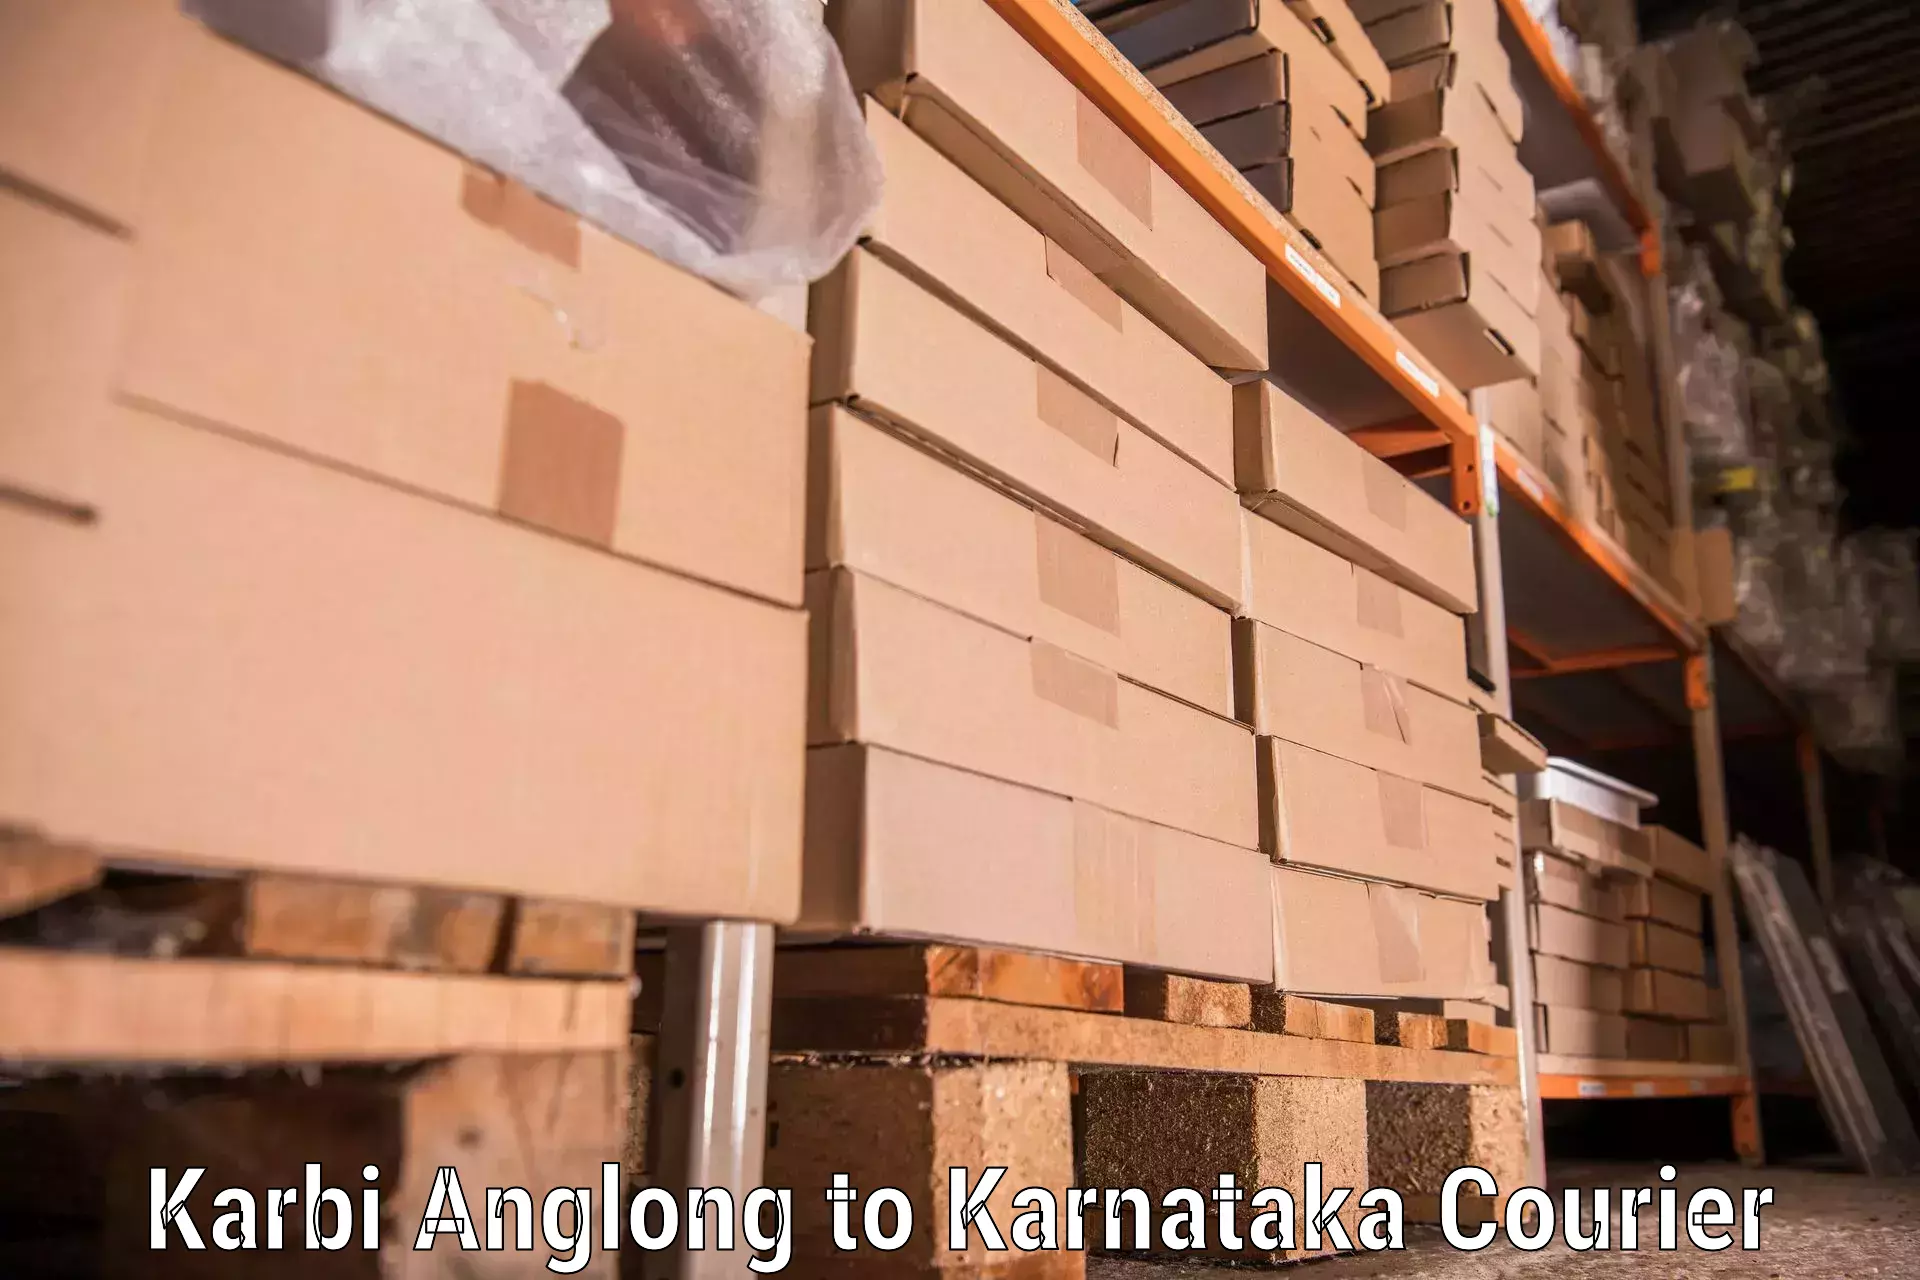 Hassle-free relocation Karbi Anglong to Manipal